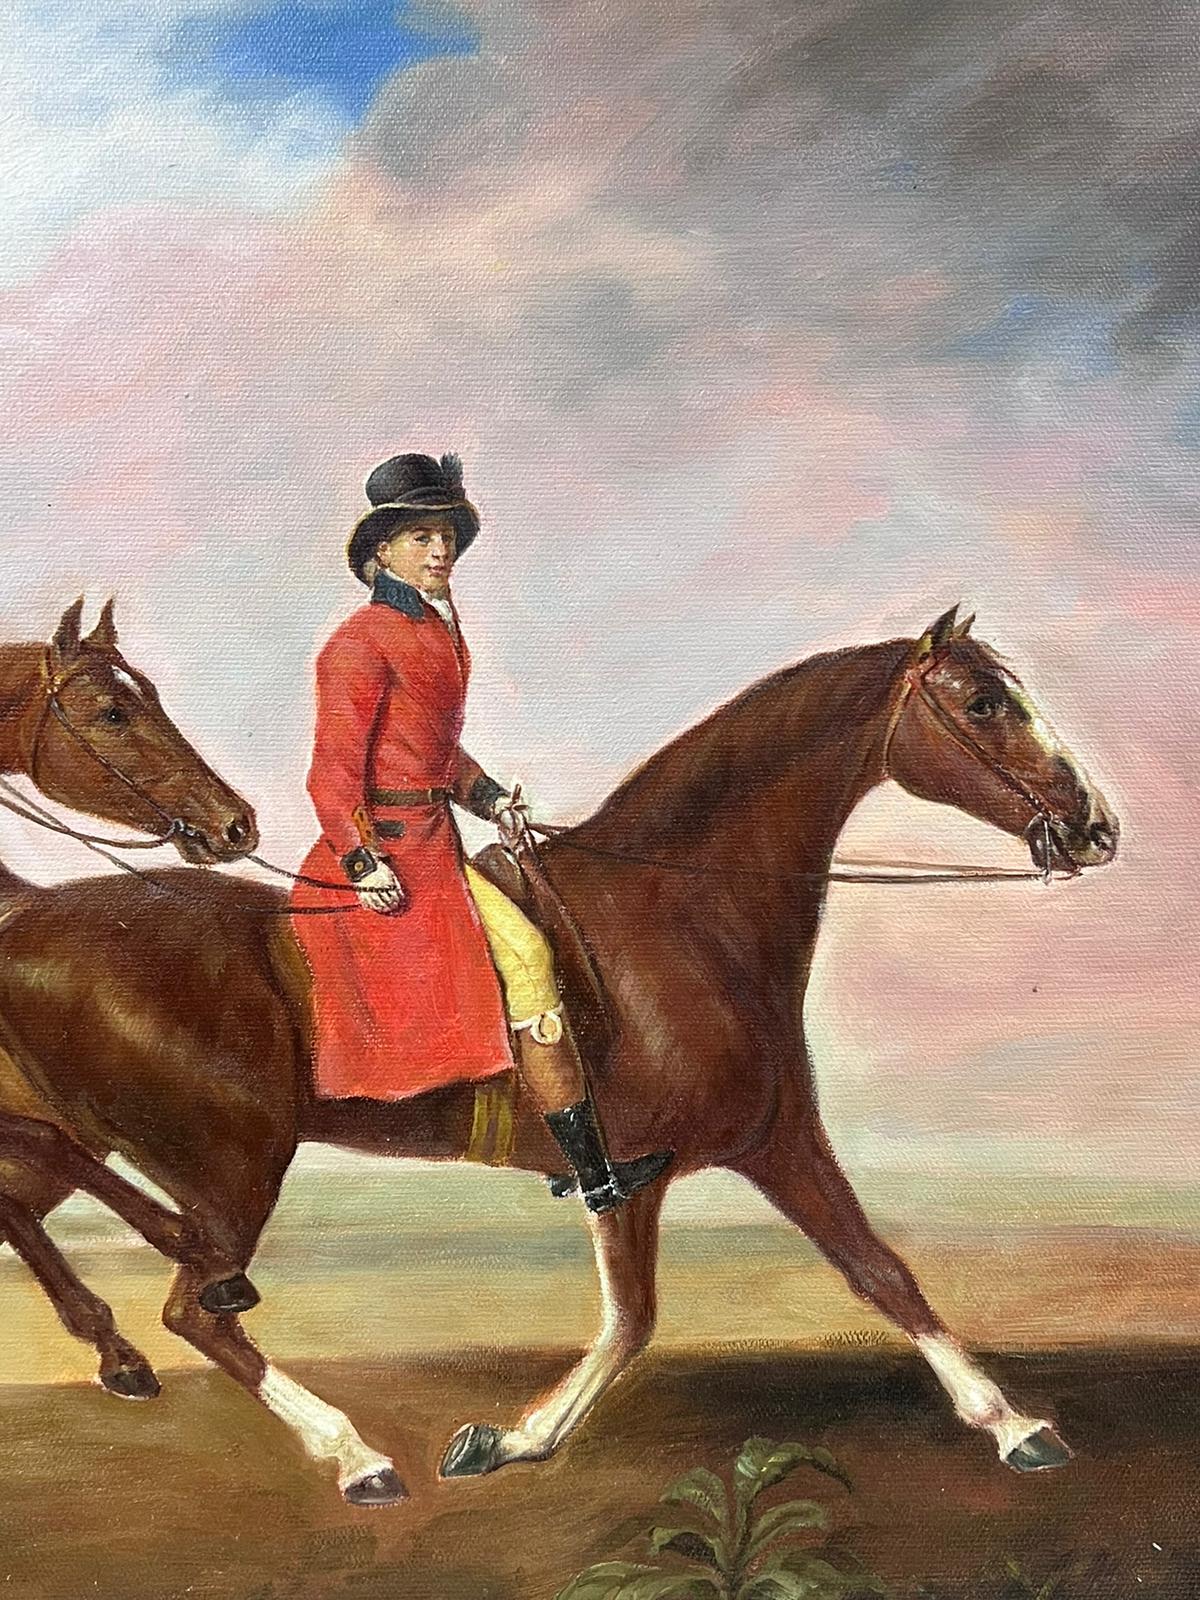 Large Sporting Art Oil Painting Rider on Horseback with Another Horse framed For Sale 1